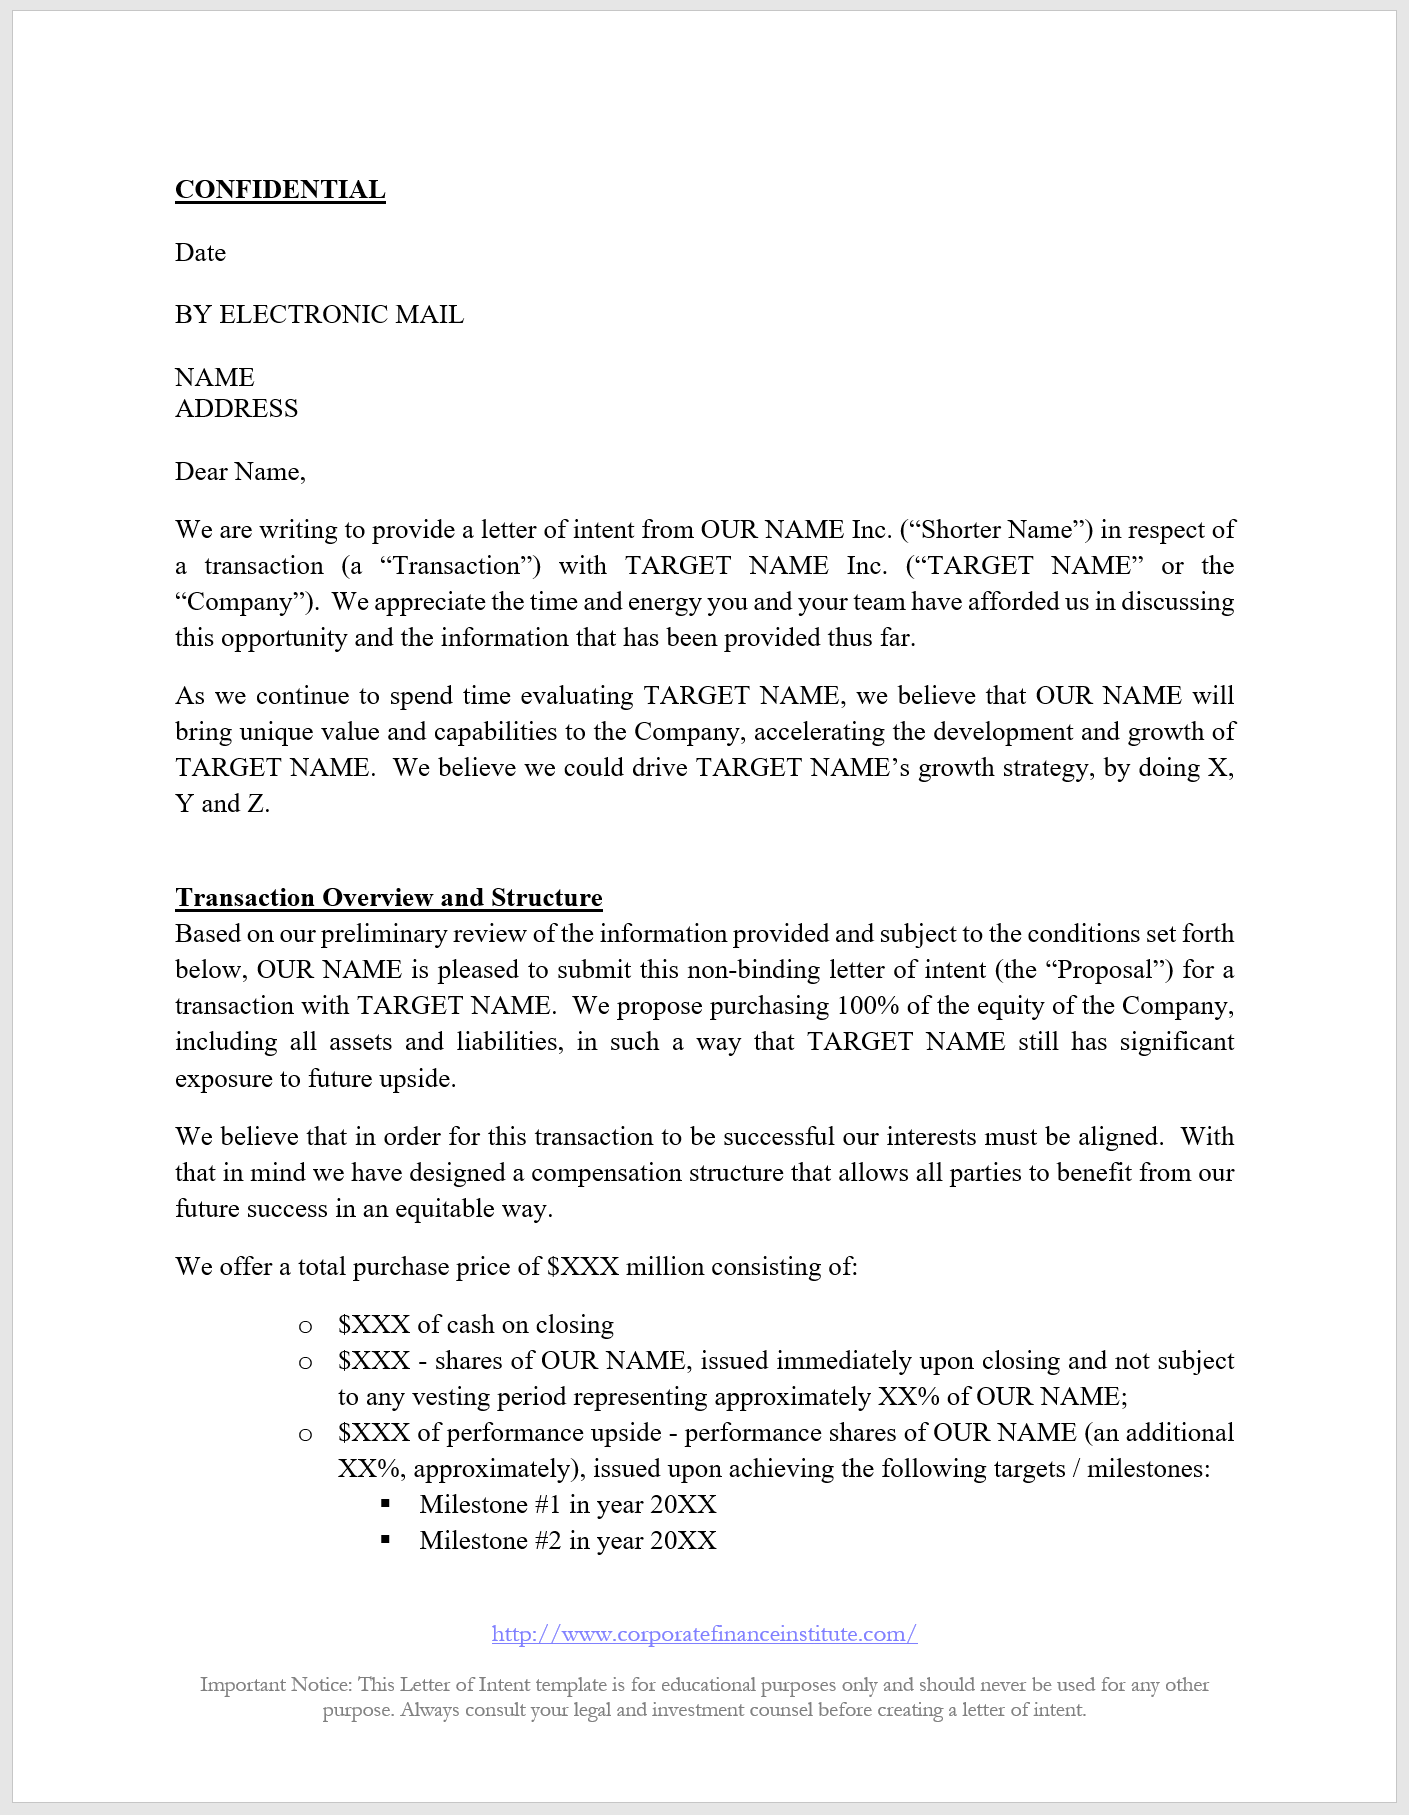 Formal Letter Of Interest from corporatefinanceinstitute.com